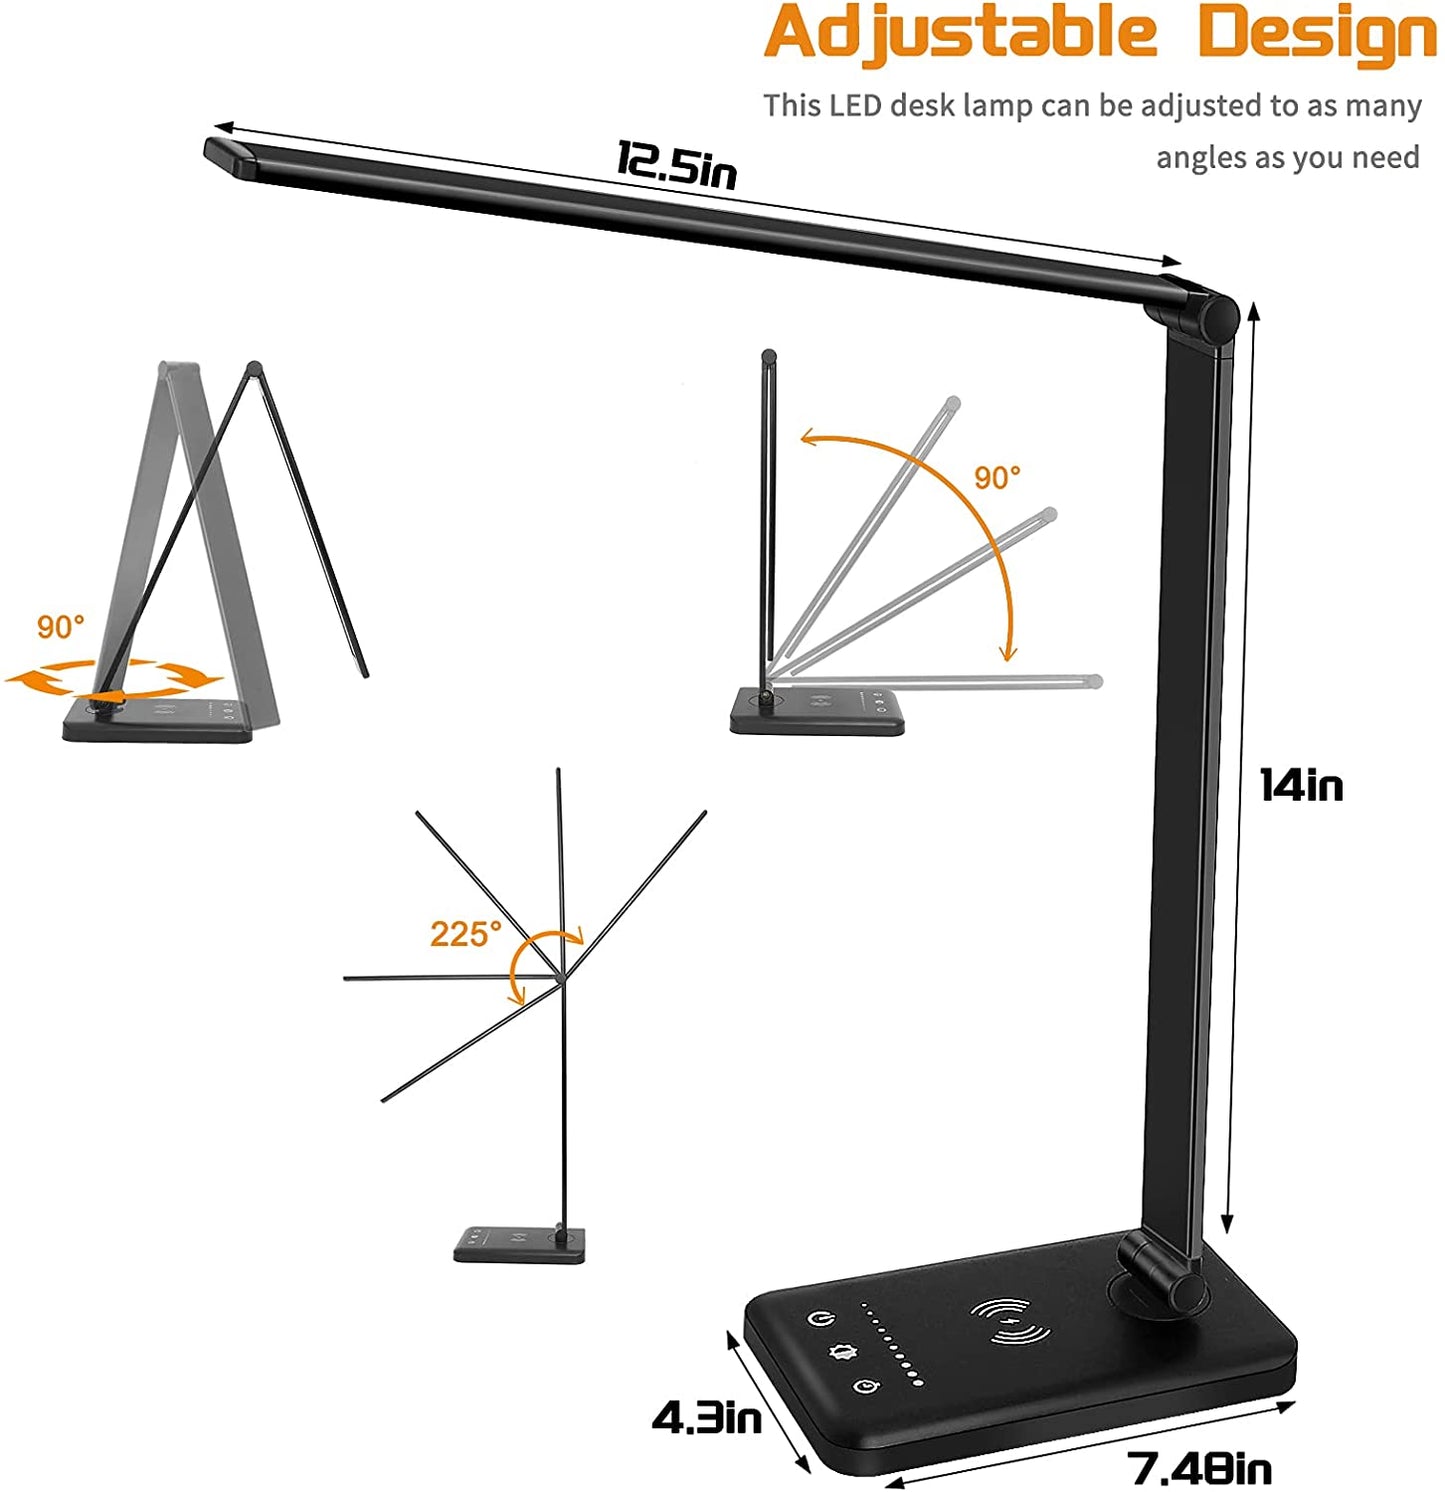 LED Desk Lamp with Wireless Charger,Touch Control,Usb Charging Port,Adjustable Arm,Eye Caring Table Lamp with 5 Lighting Modes & 10 Brightness Levels, 30/60 Min Auto Timer,Desk Lamps for Home Office